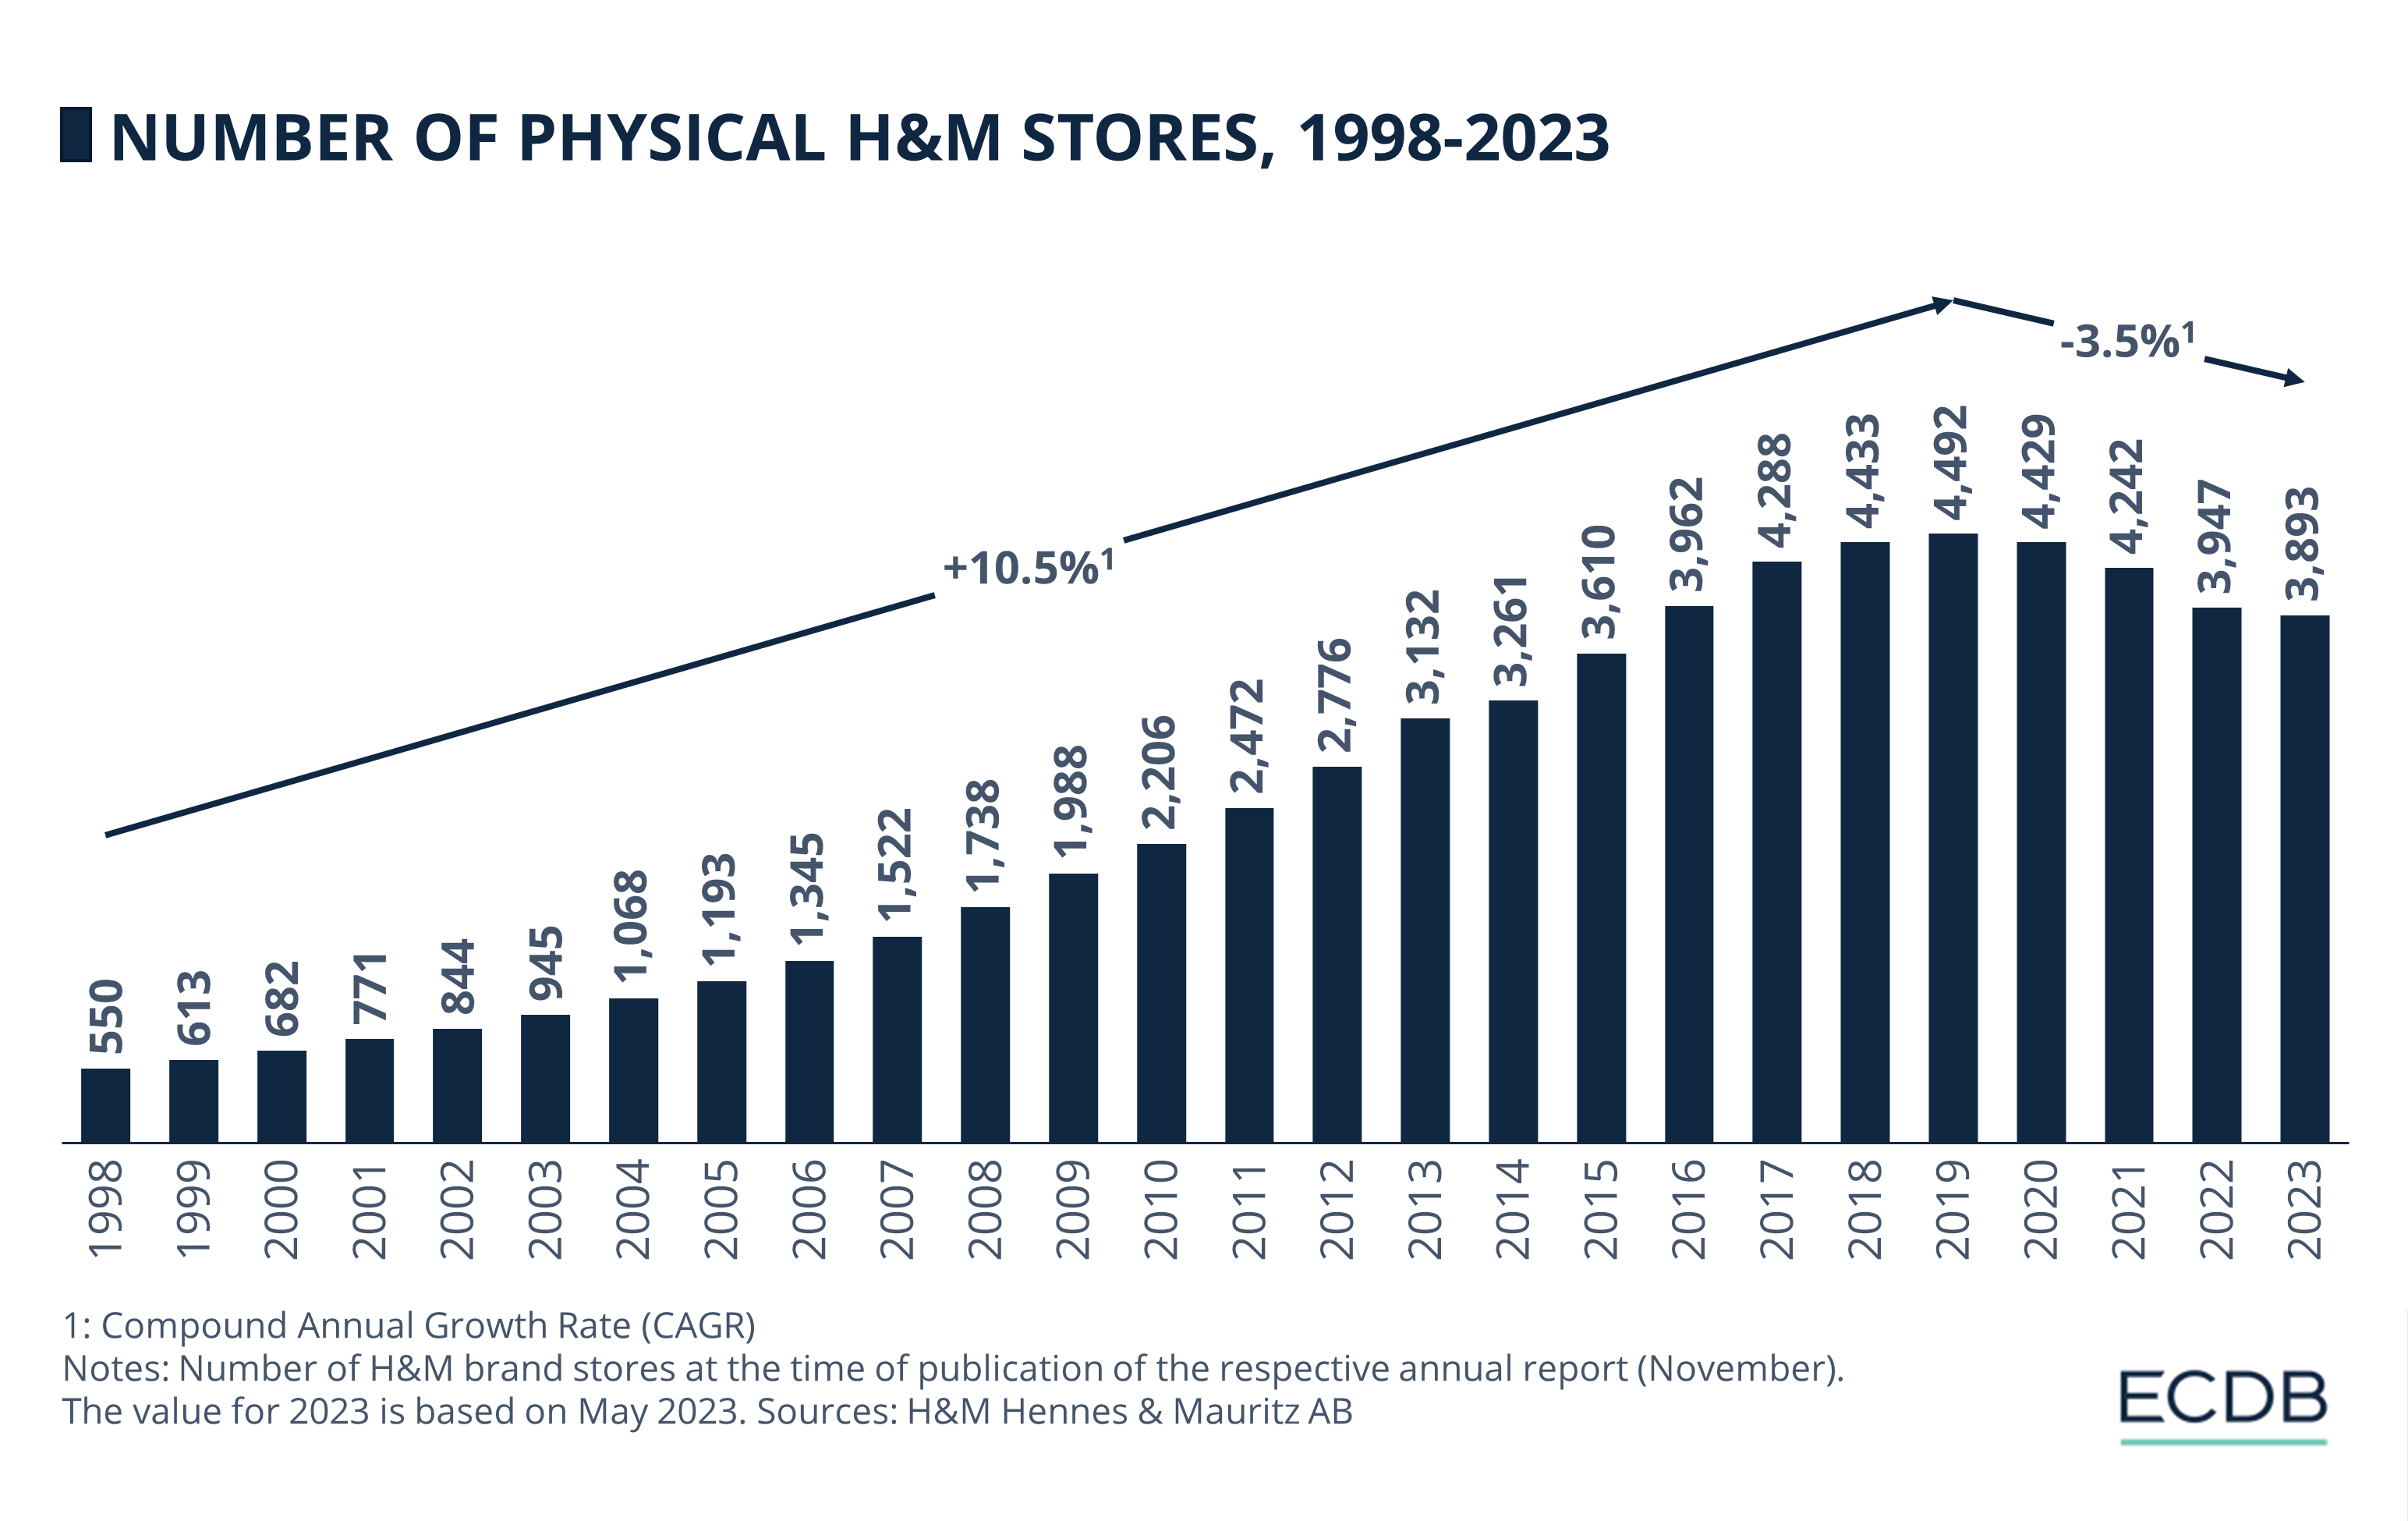 Number of Physical H&M Stores, 1998-2023